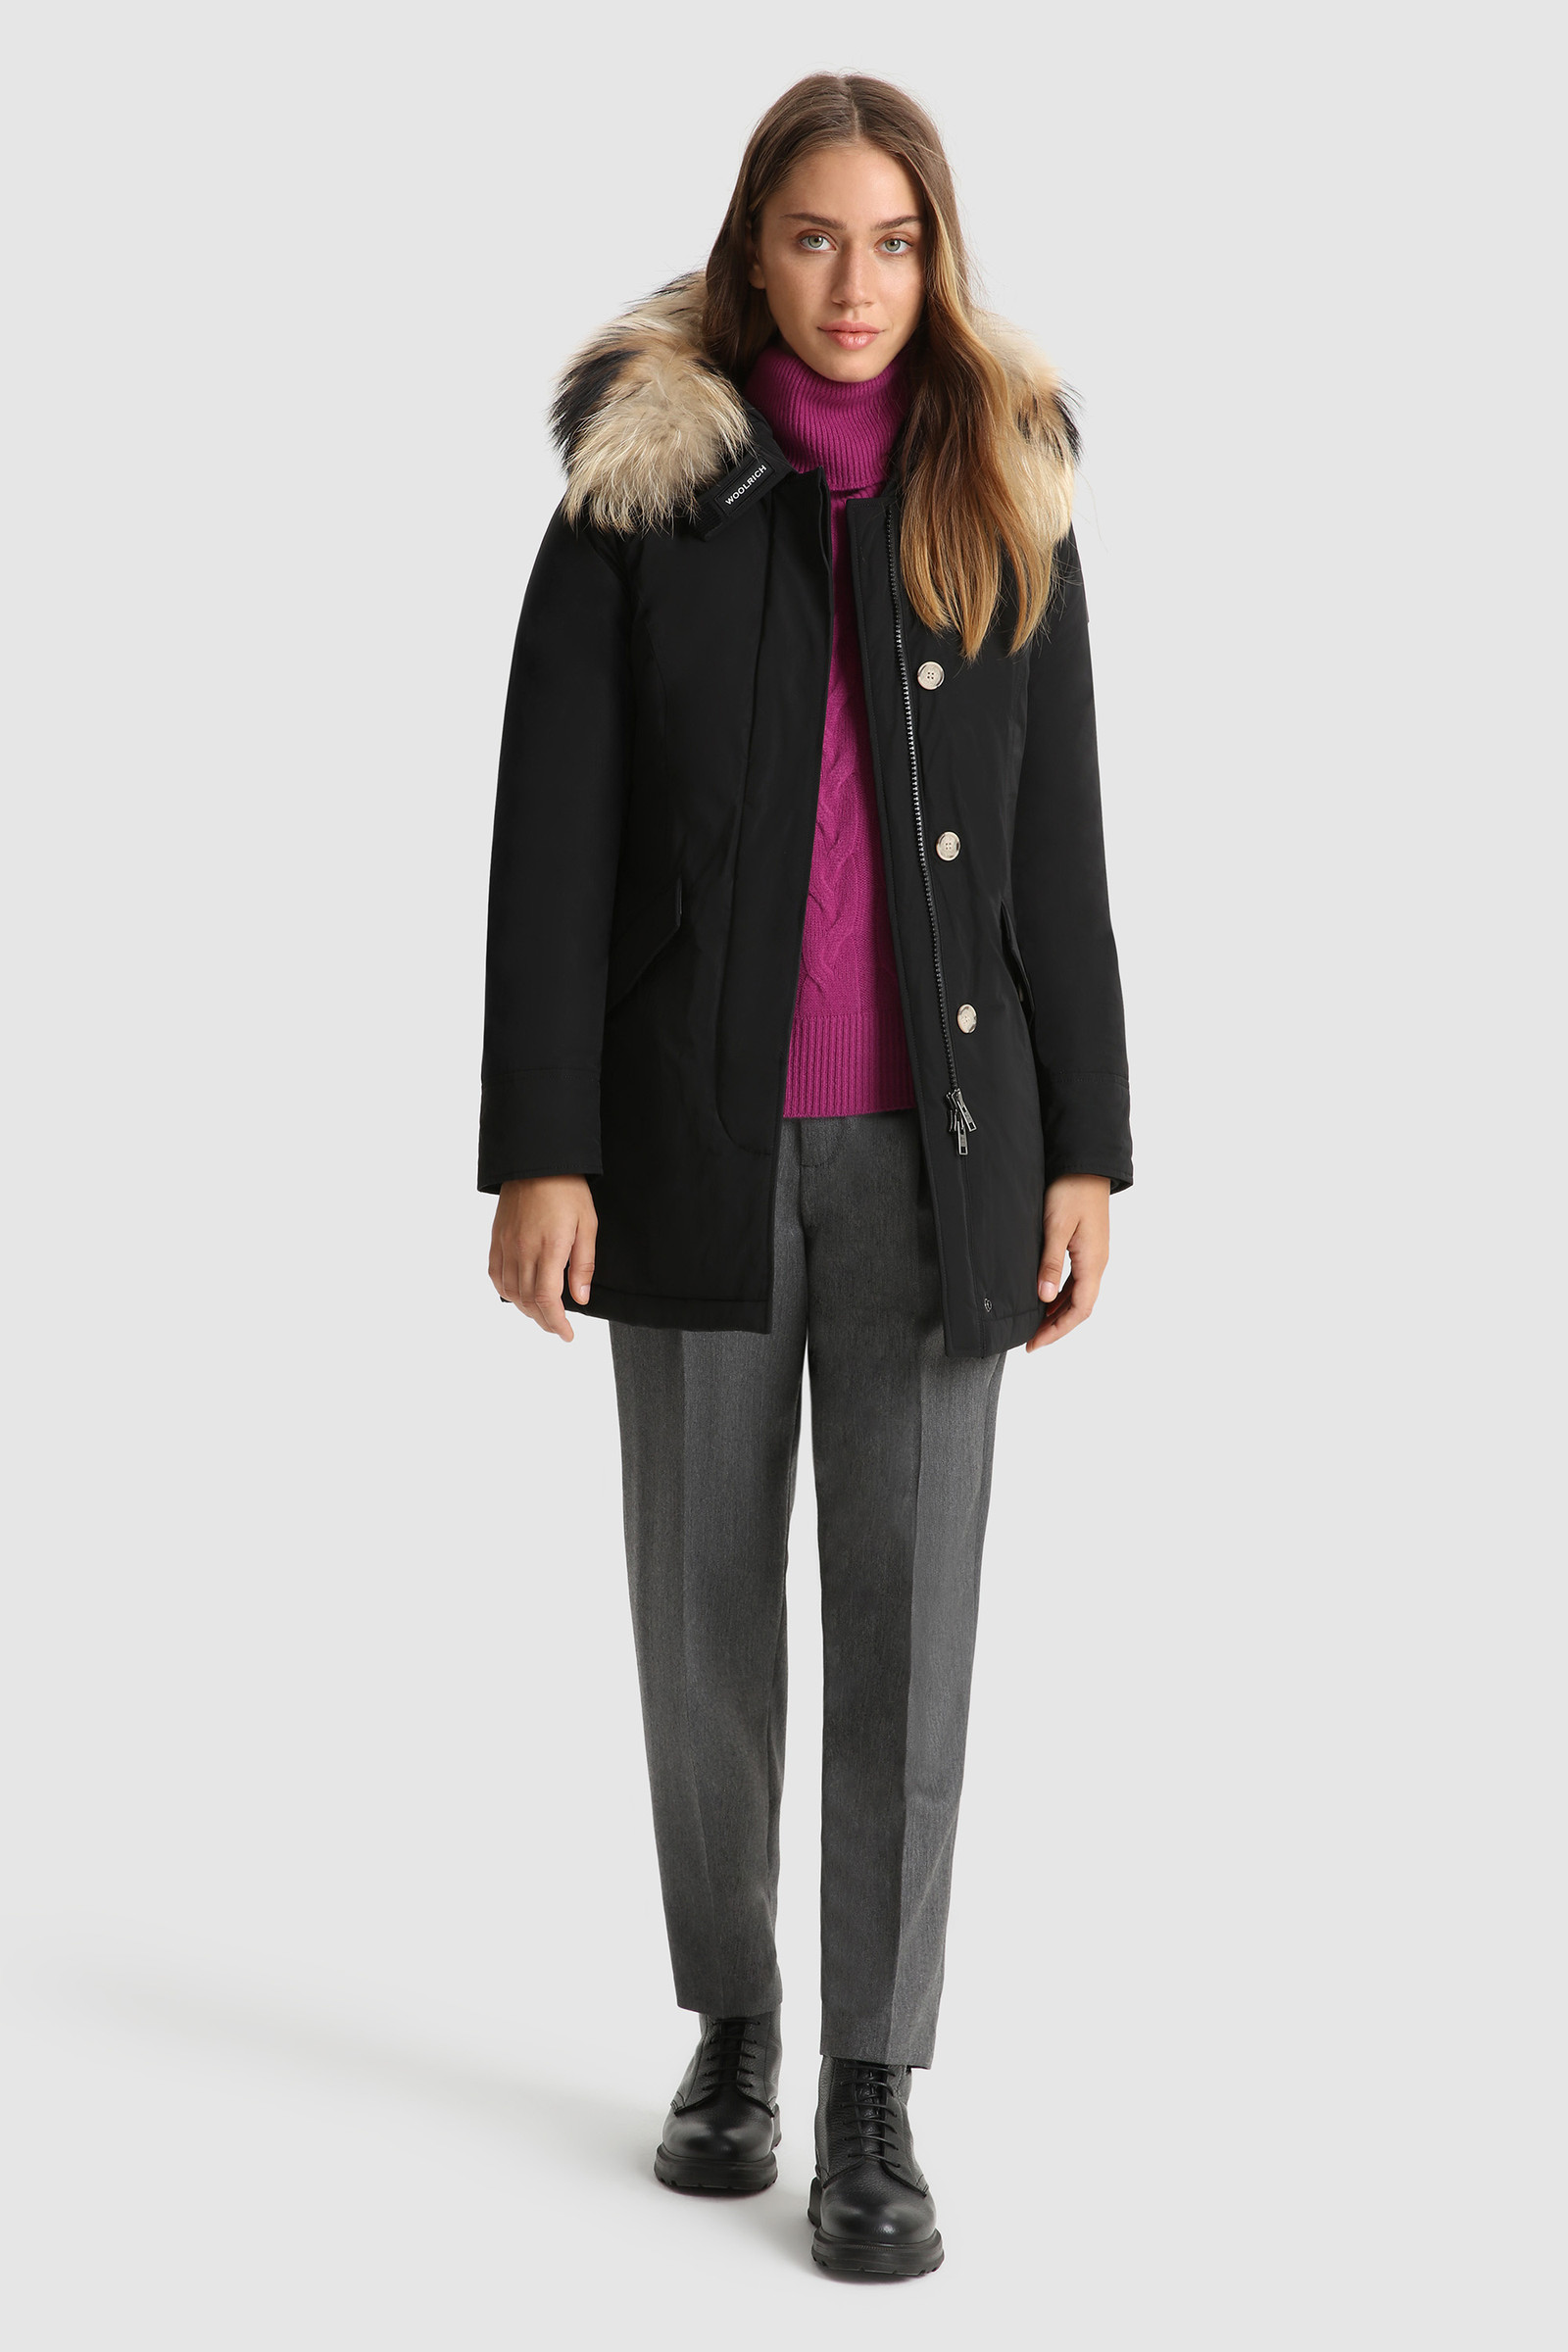 Arctic Parka in City Fabric with Removable Fur - Women - Black